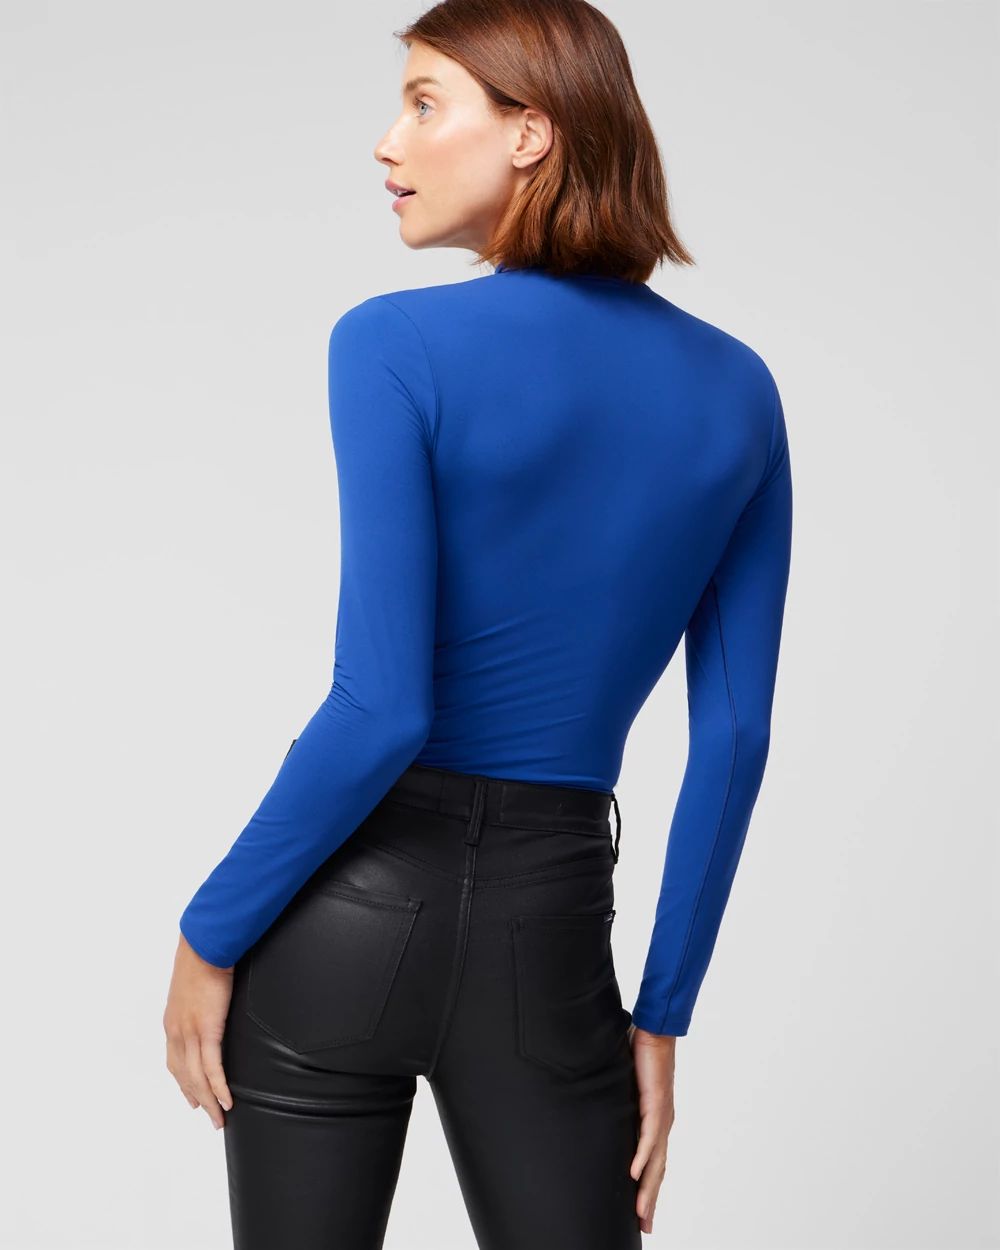 WHBM® FORME Keyhole Bodysuit click to view larger image.